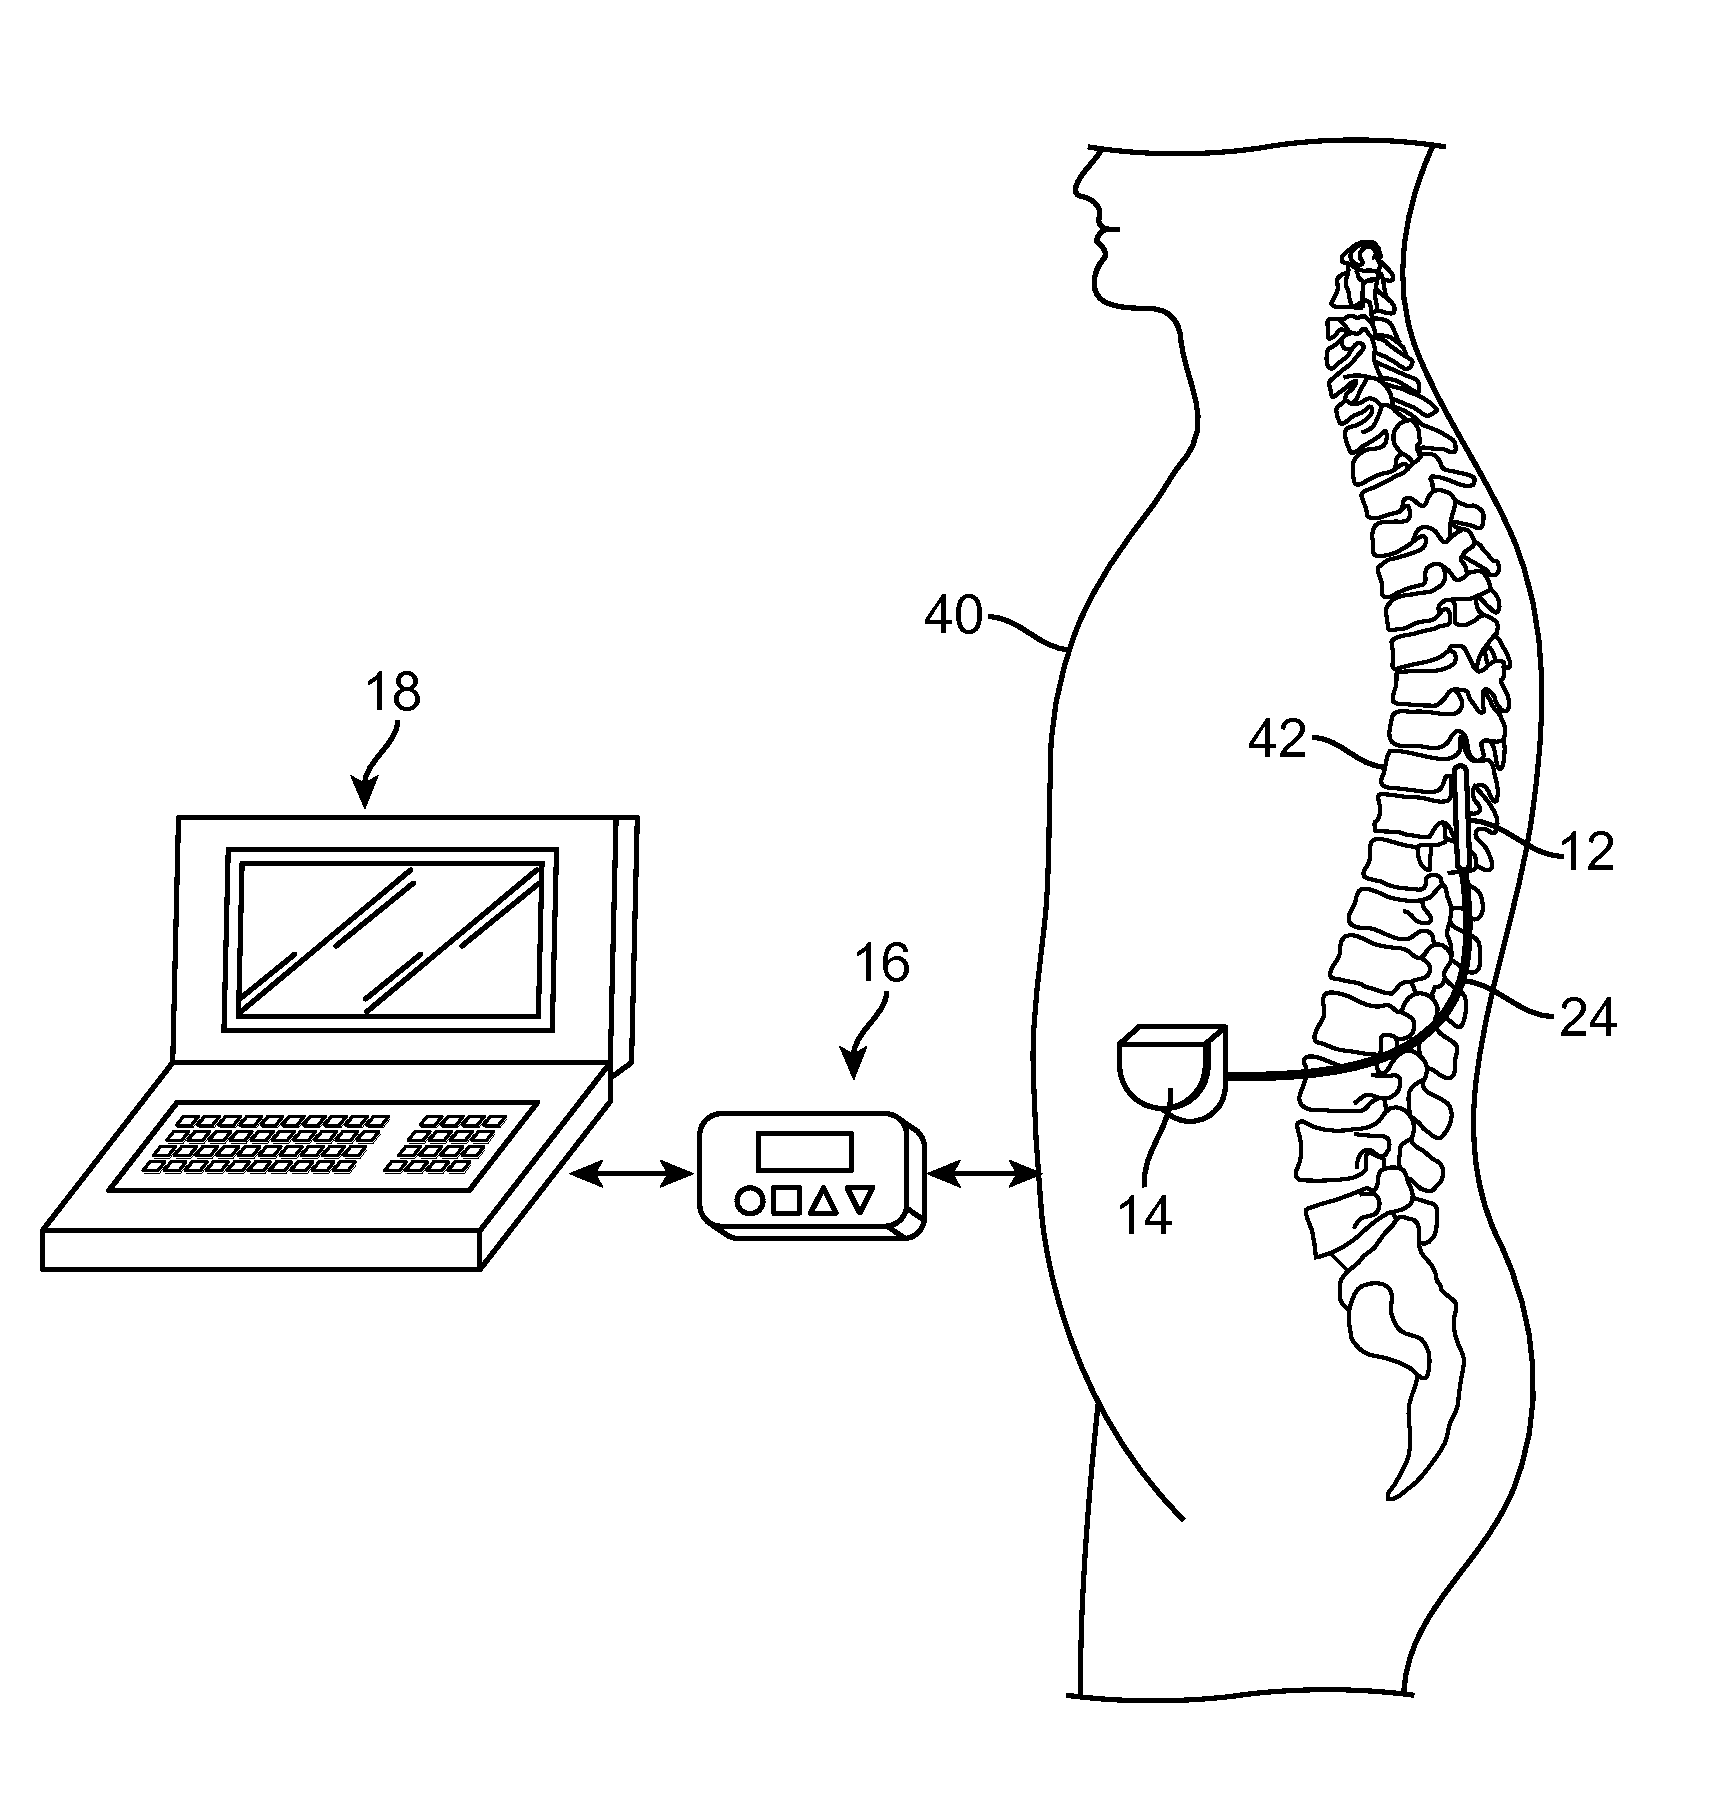 Method for achieving low-back spinal cord stimulation without significant side-effects